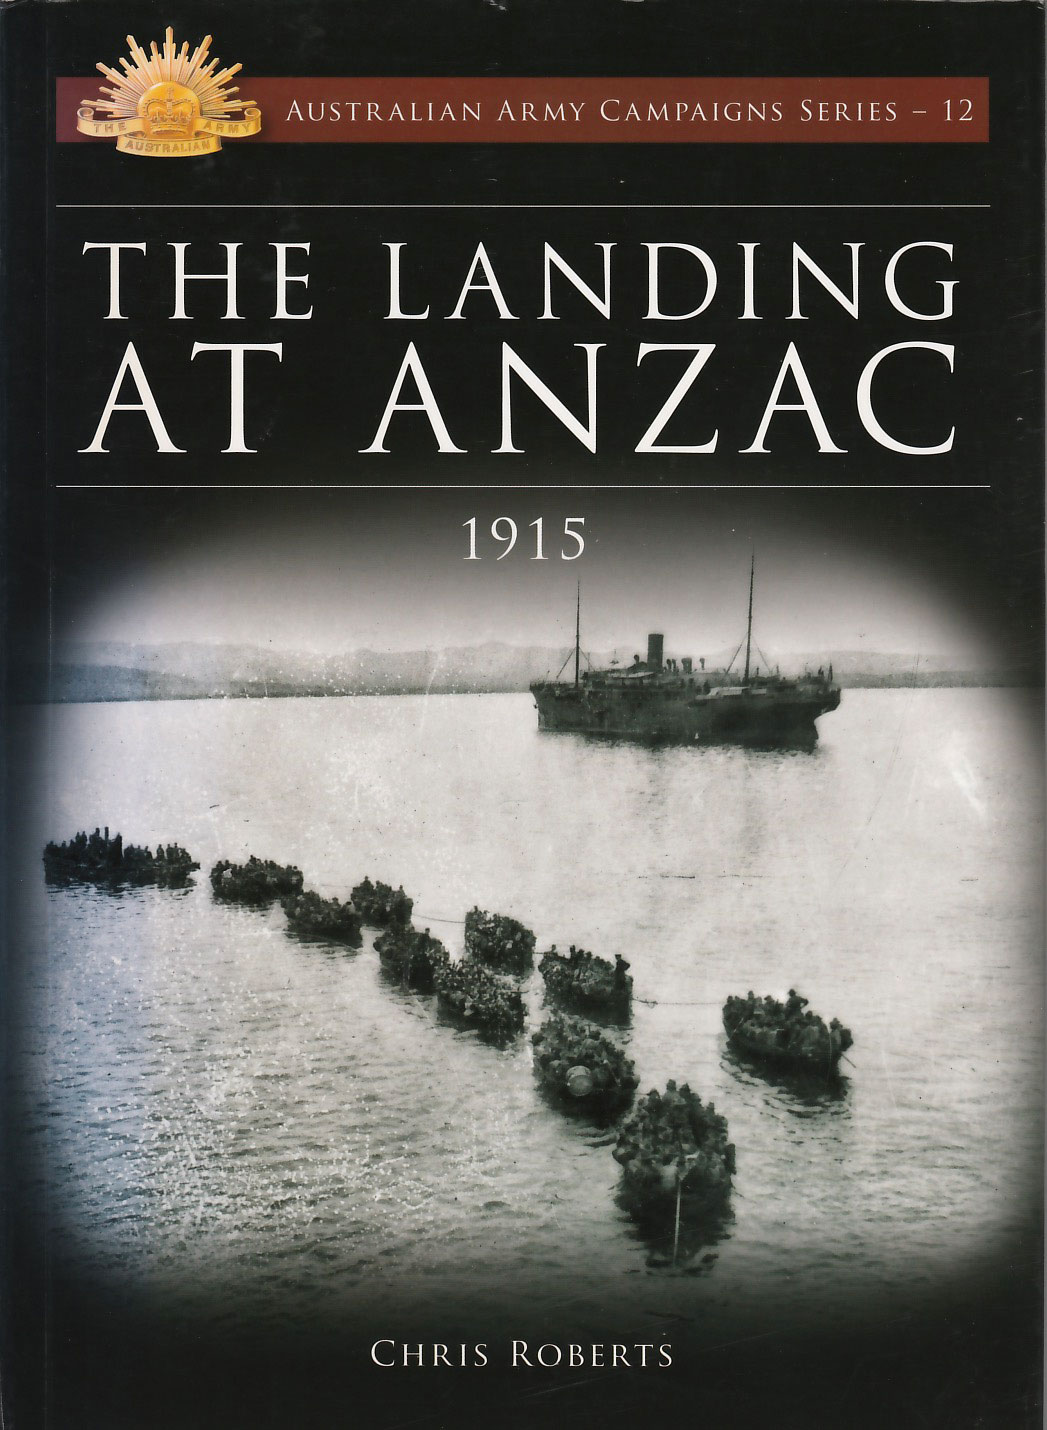 The Landing at Anzac